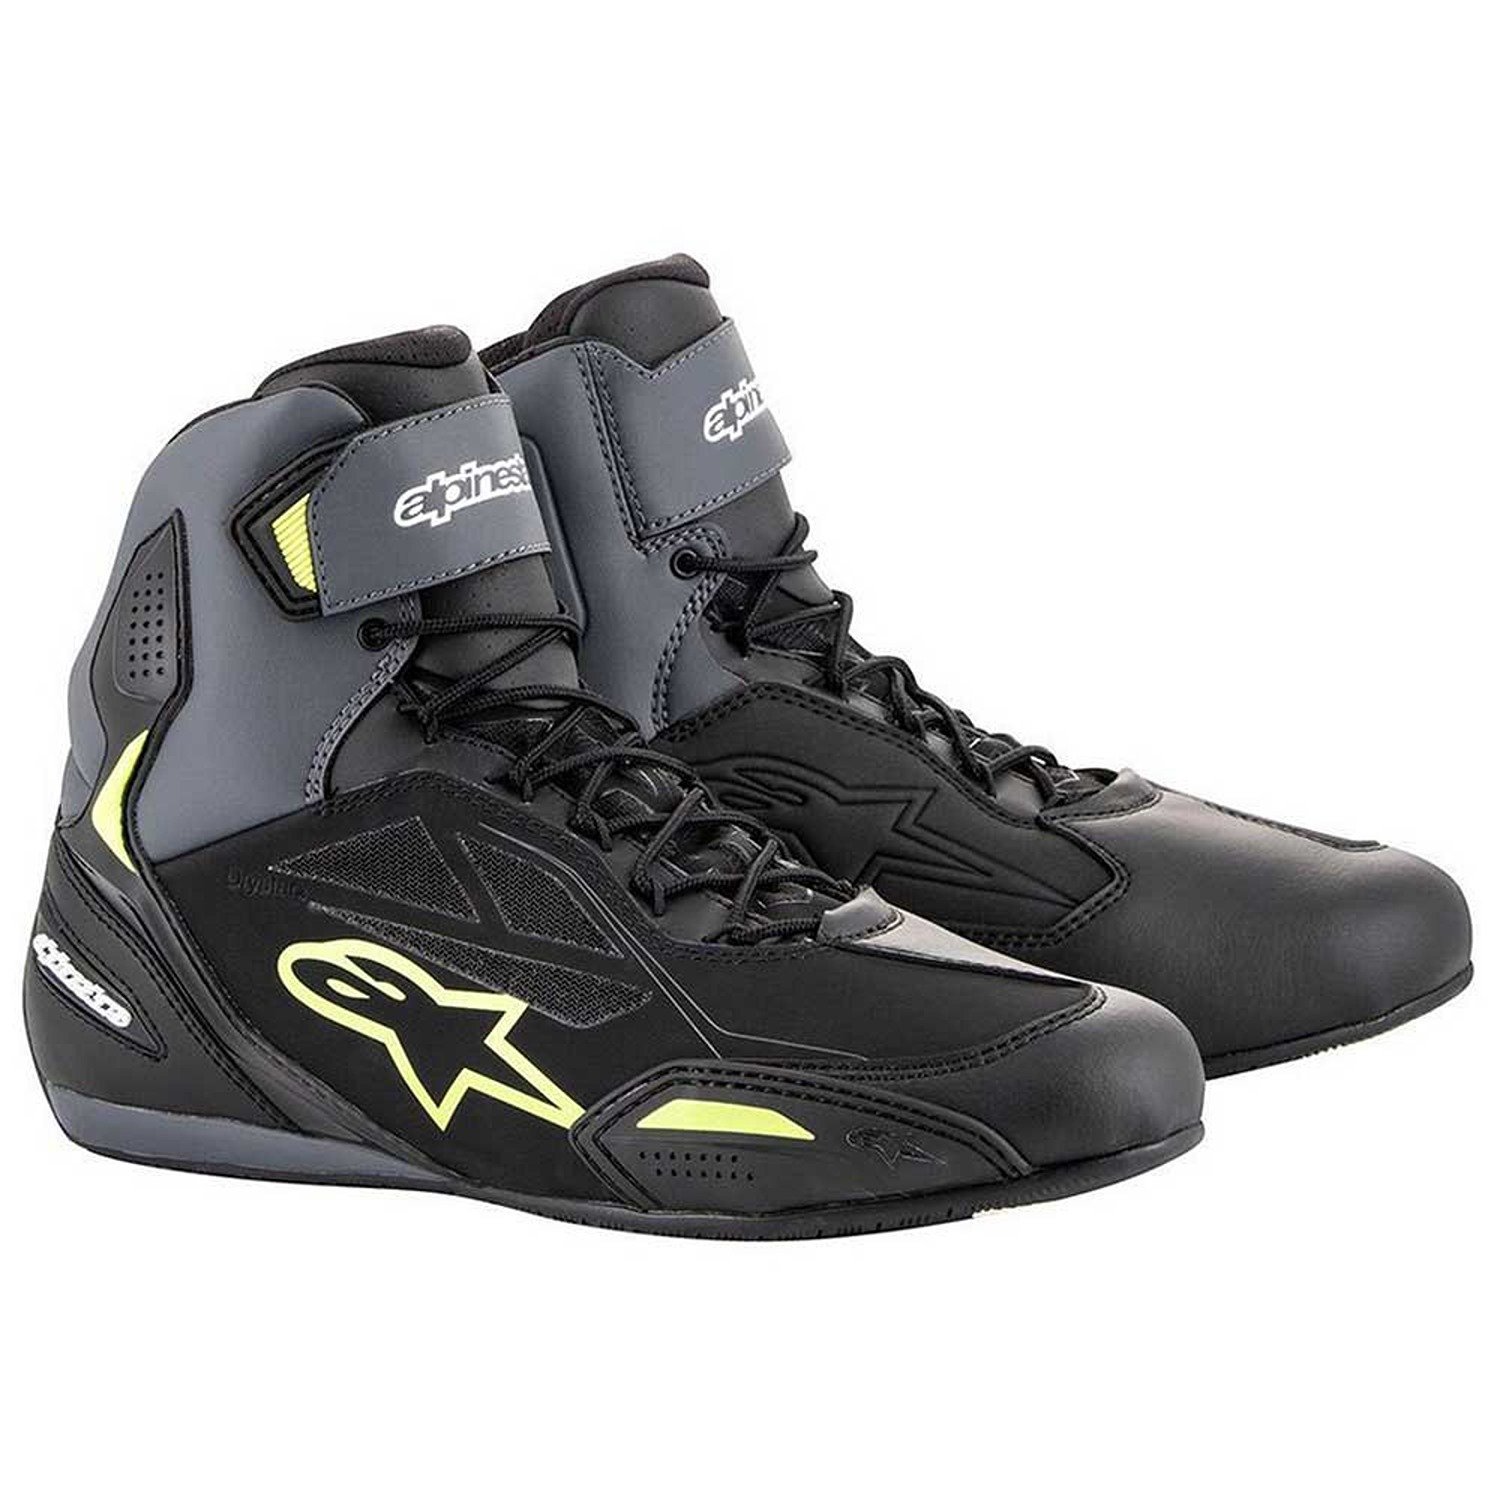 Image of EU Alpinestars Faster-3 Shoes Black Yellow Fluo Taille US 6